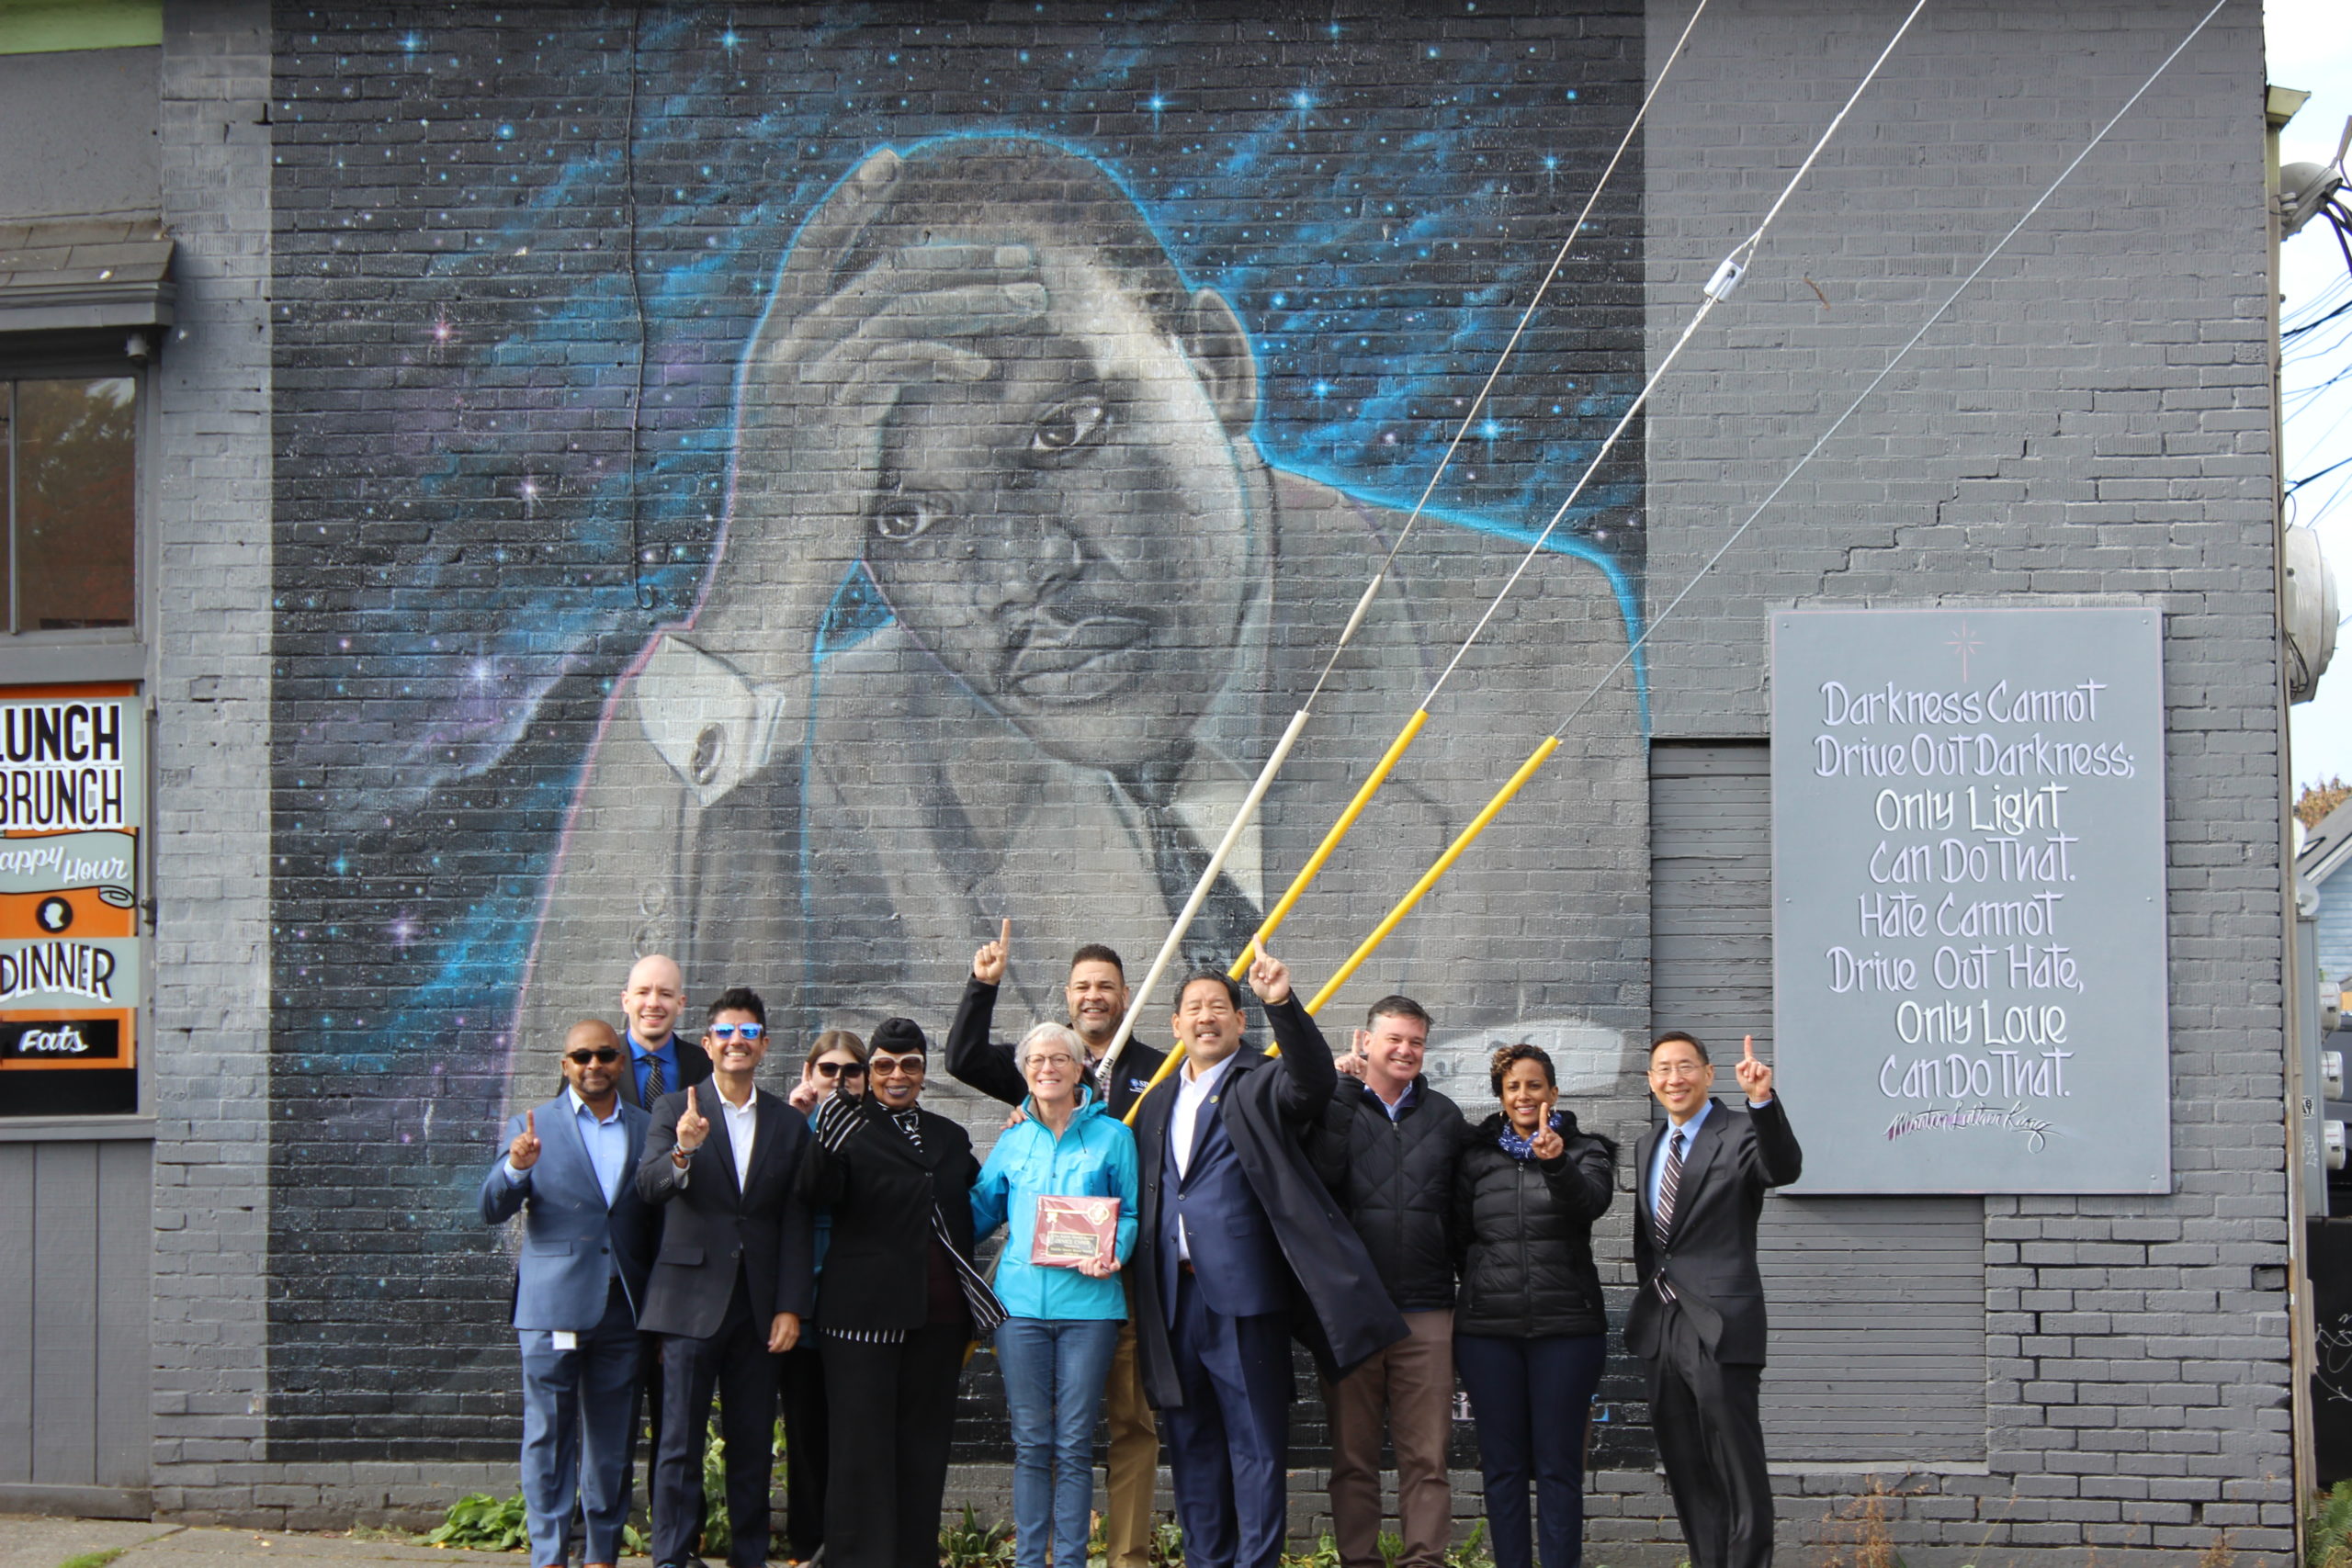 Mayor Harrell and his team pose in front of the MLK Jr. mural and raise their index finger to "A Seattle"